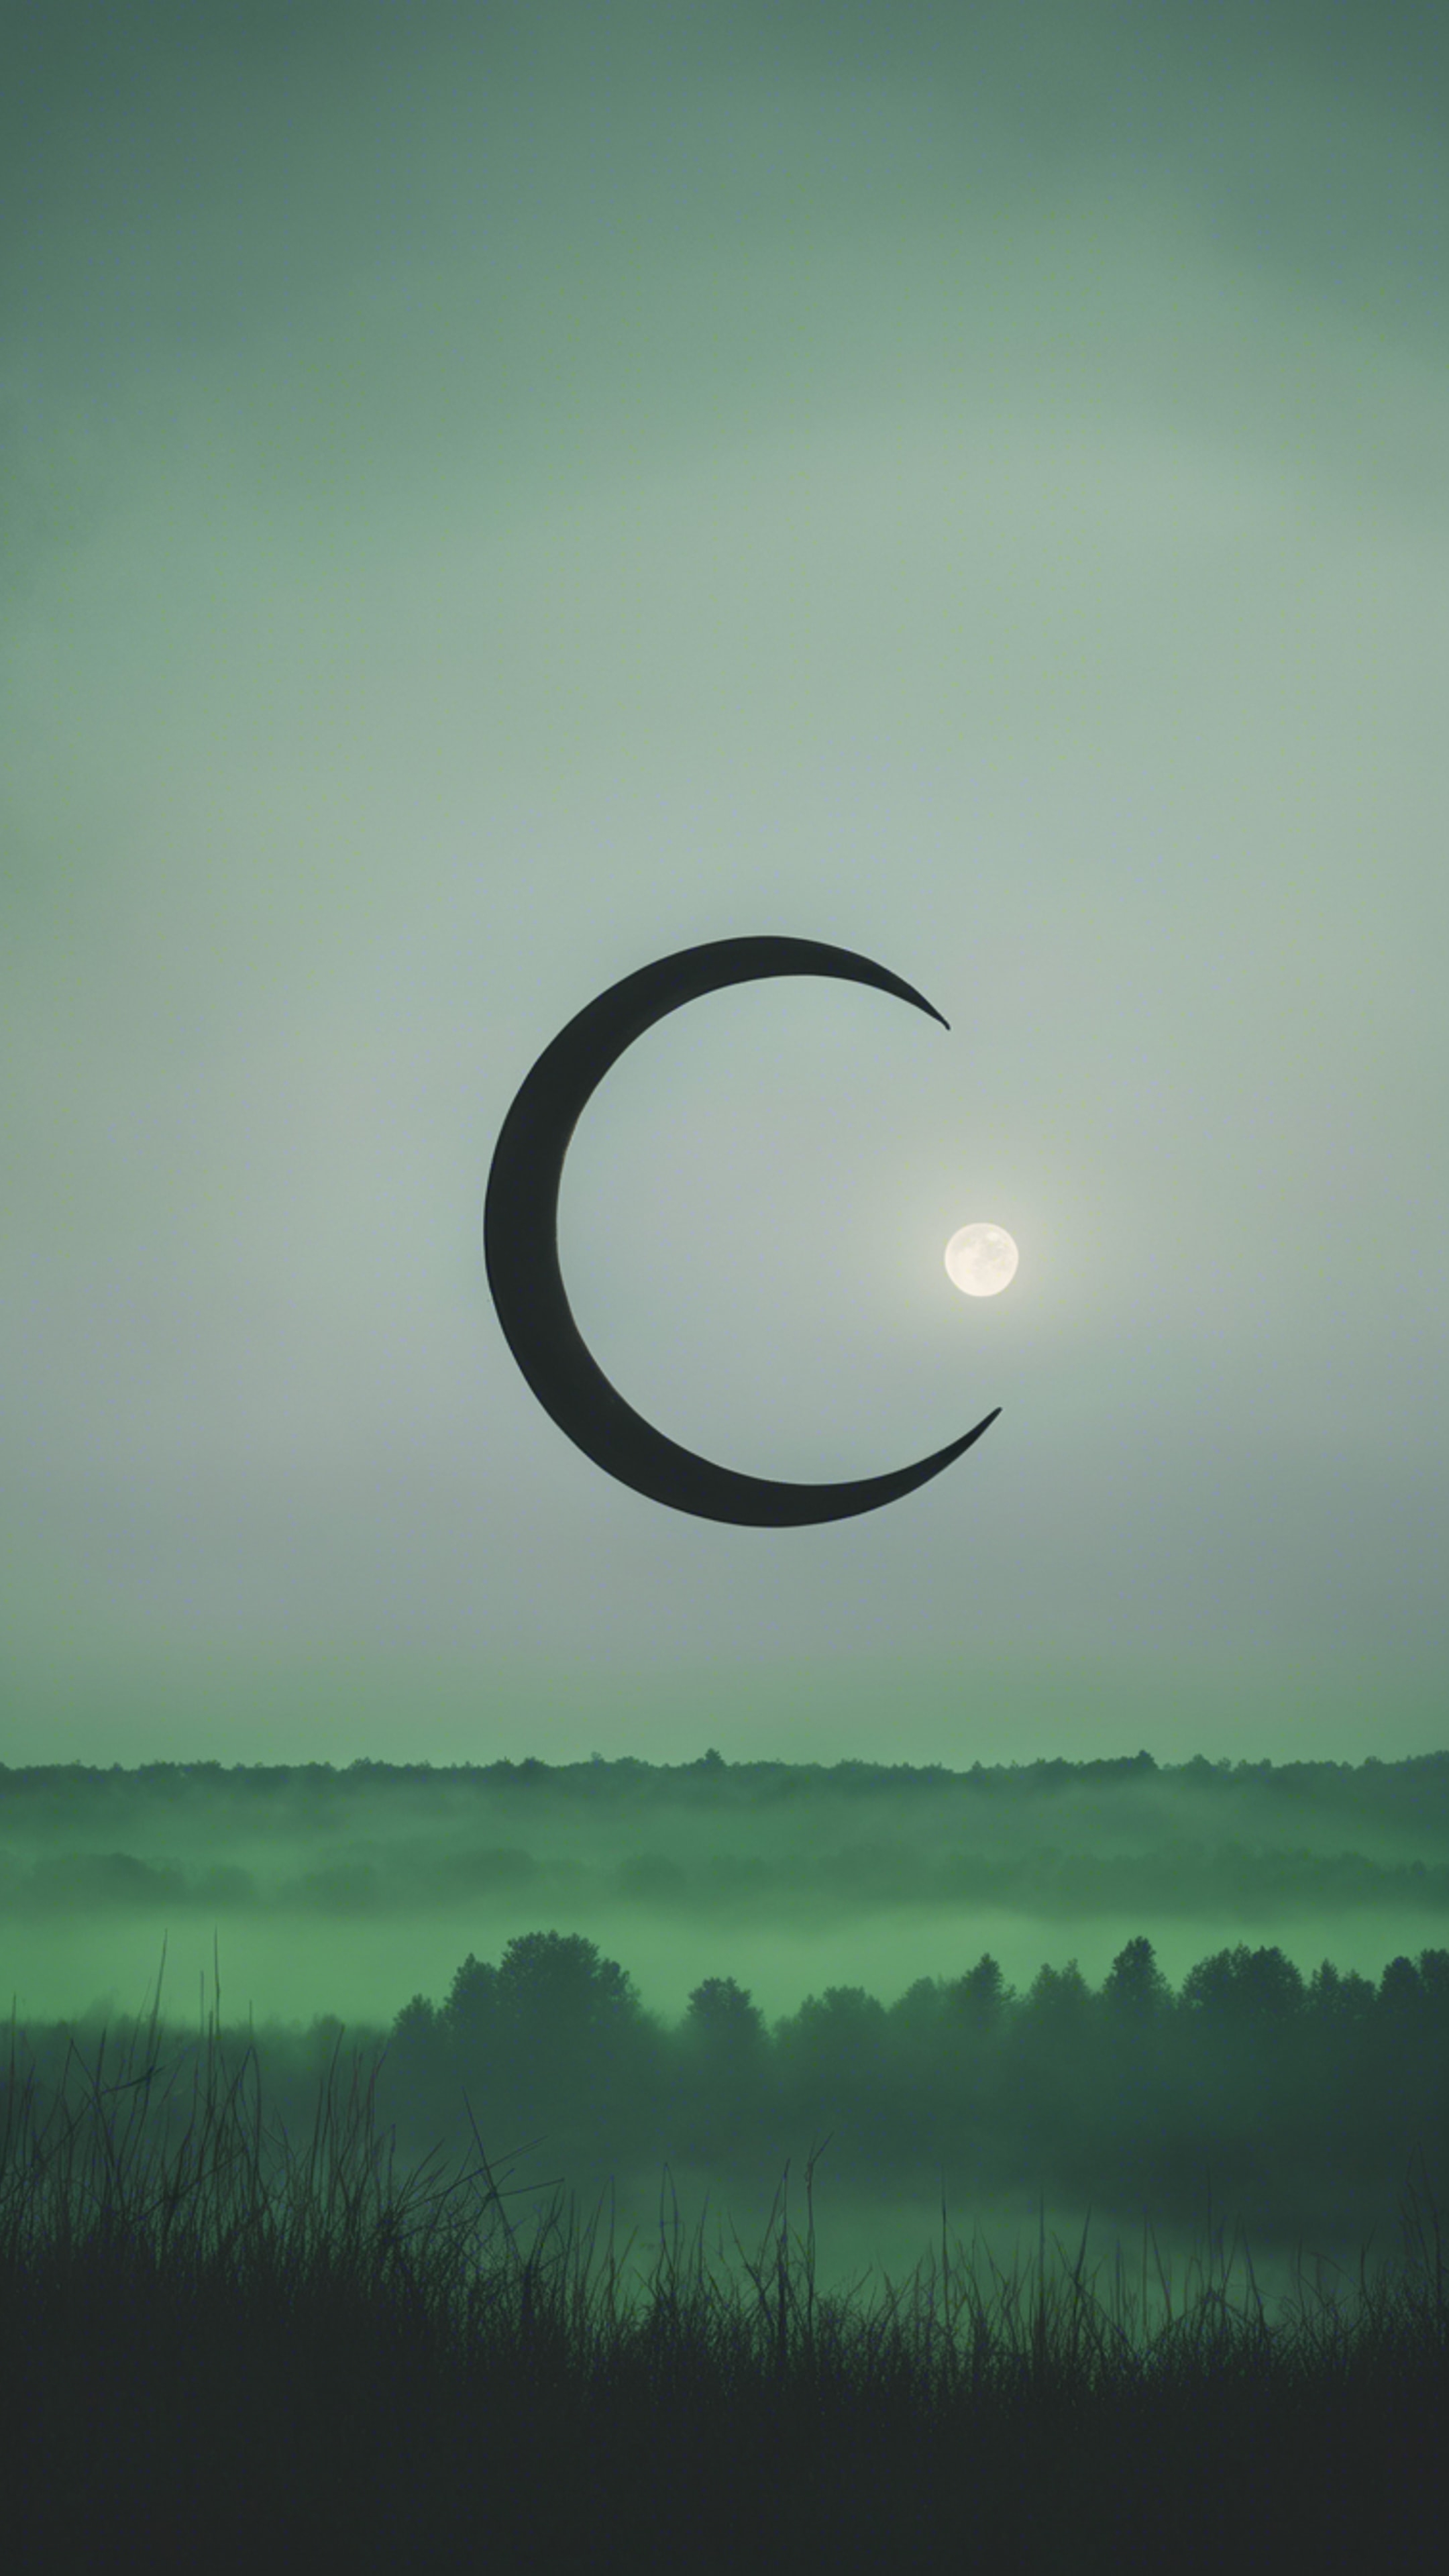 Gothic view of a black crescent moon under a green misty sky. Tapeta[13b0789ef30c4bbcb3bb]